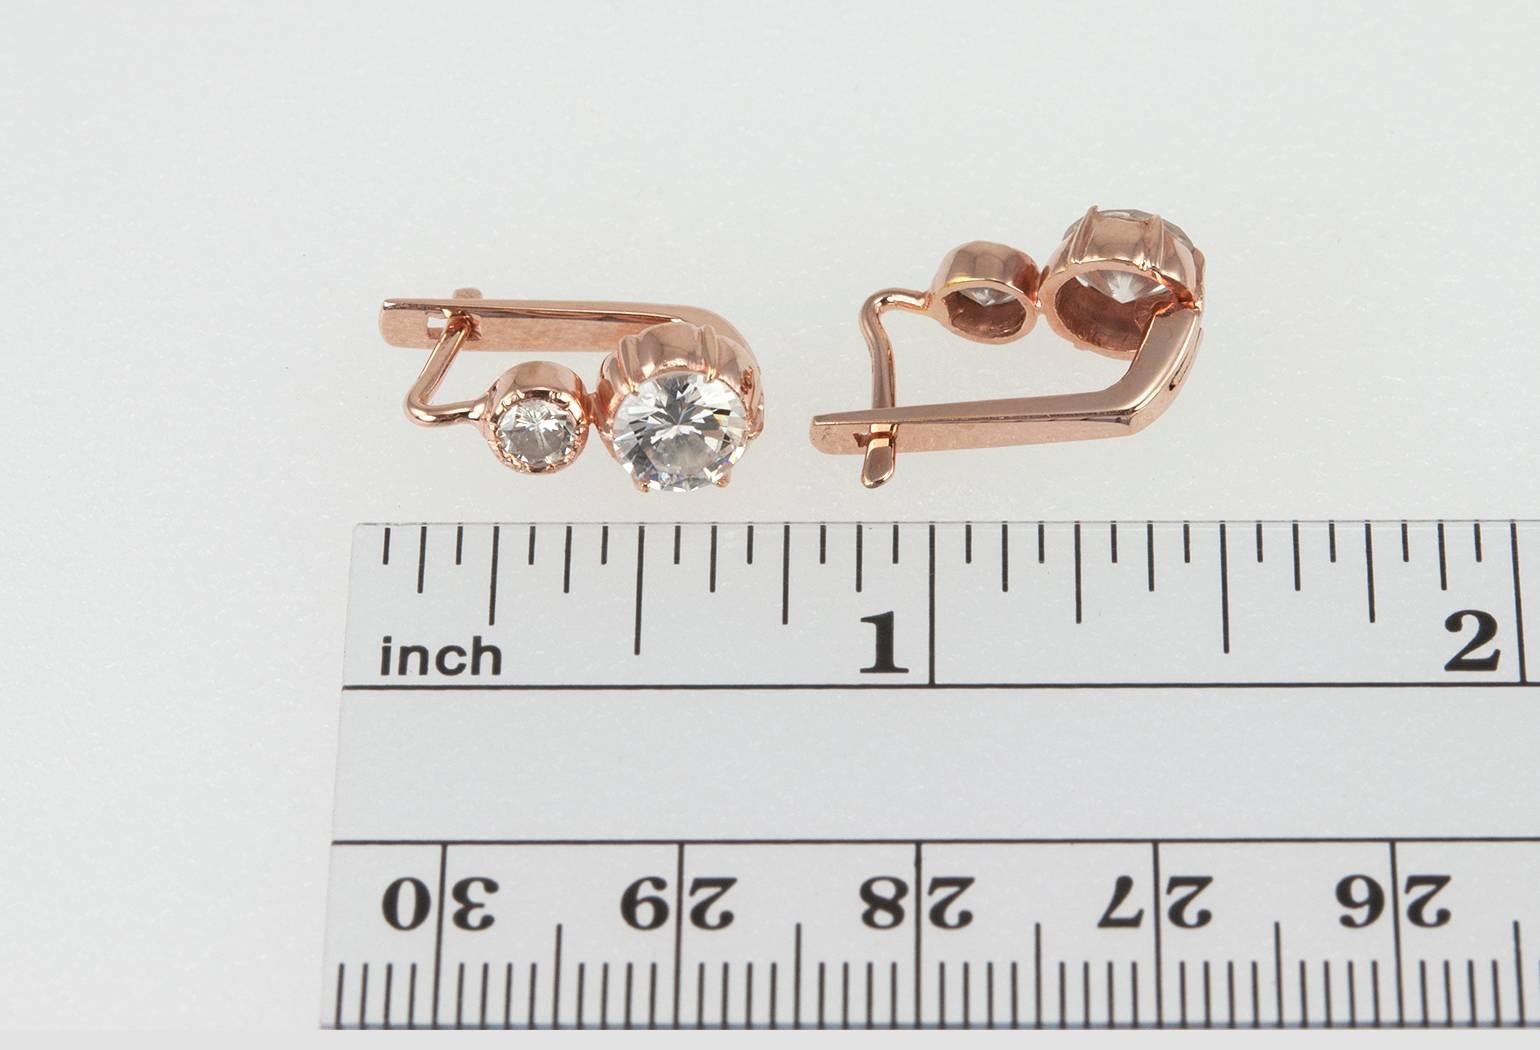 A pair of diamond earrings you won't want to take off! These 14 karat rose gold earrings feature two round brilliant cut diamonds per earring with the smaller of the diamonds (approximately 0.15 carats each) bezel set above the larger diamond